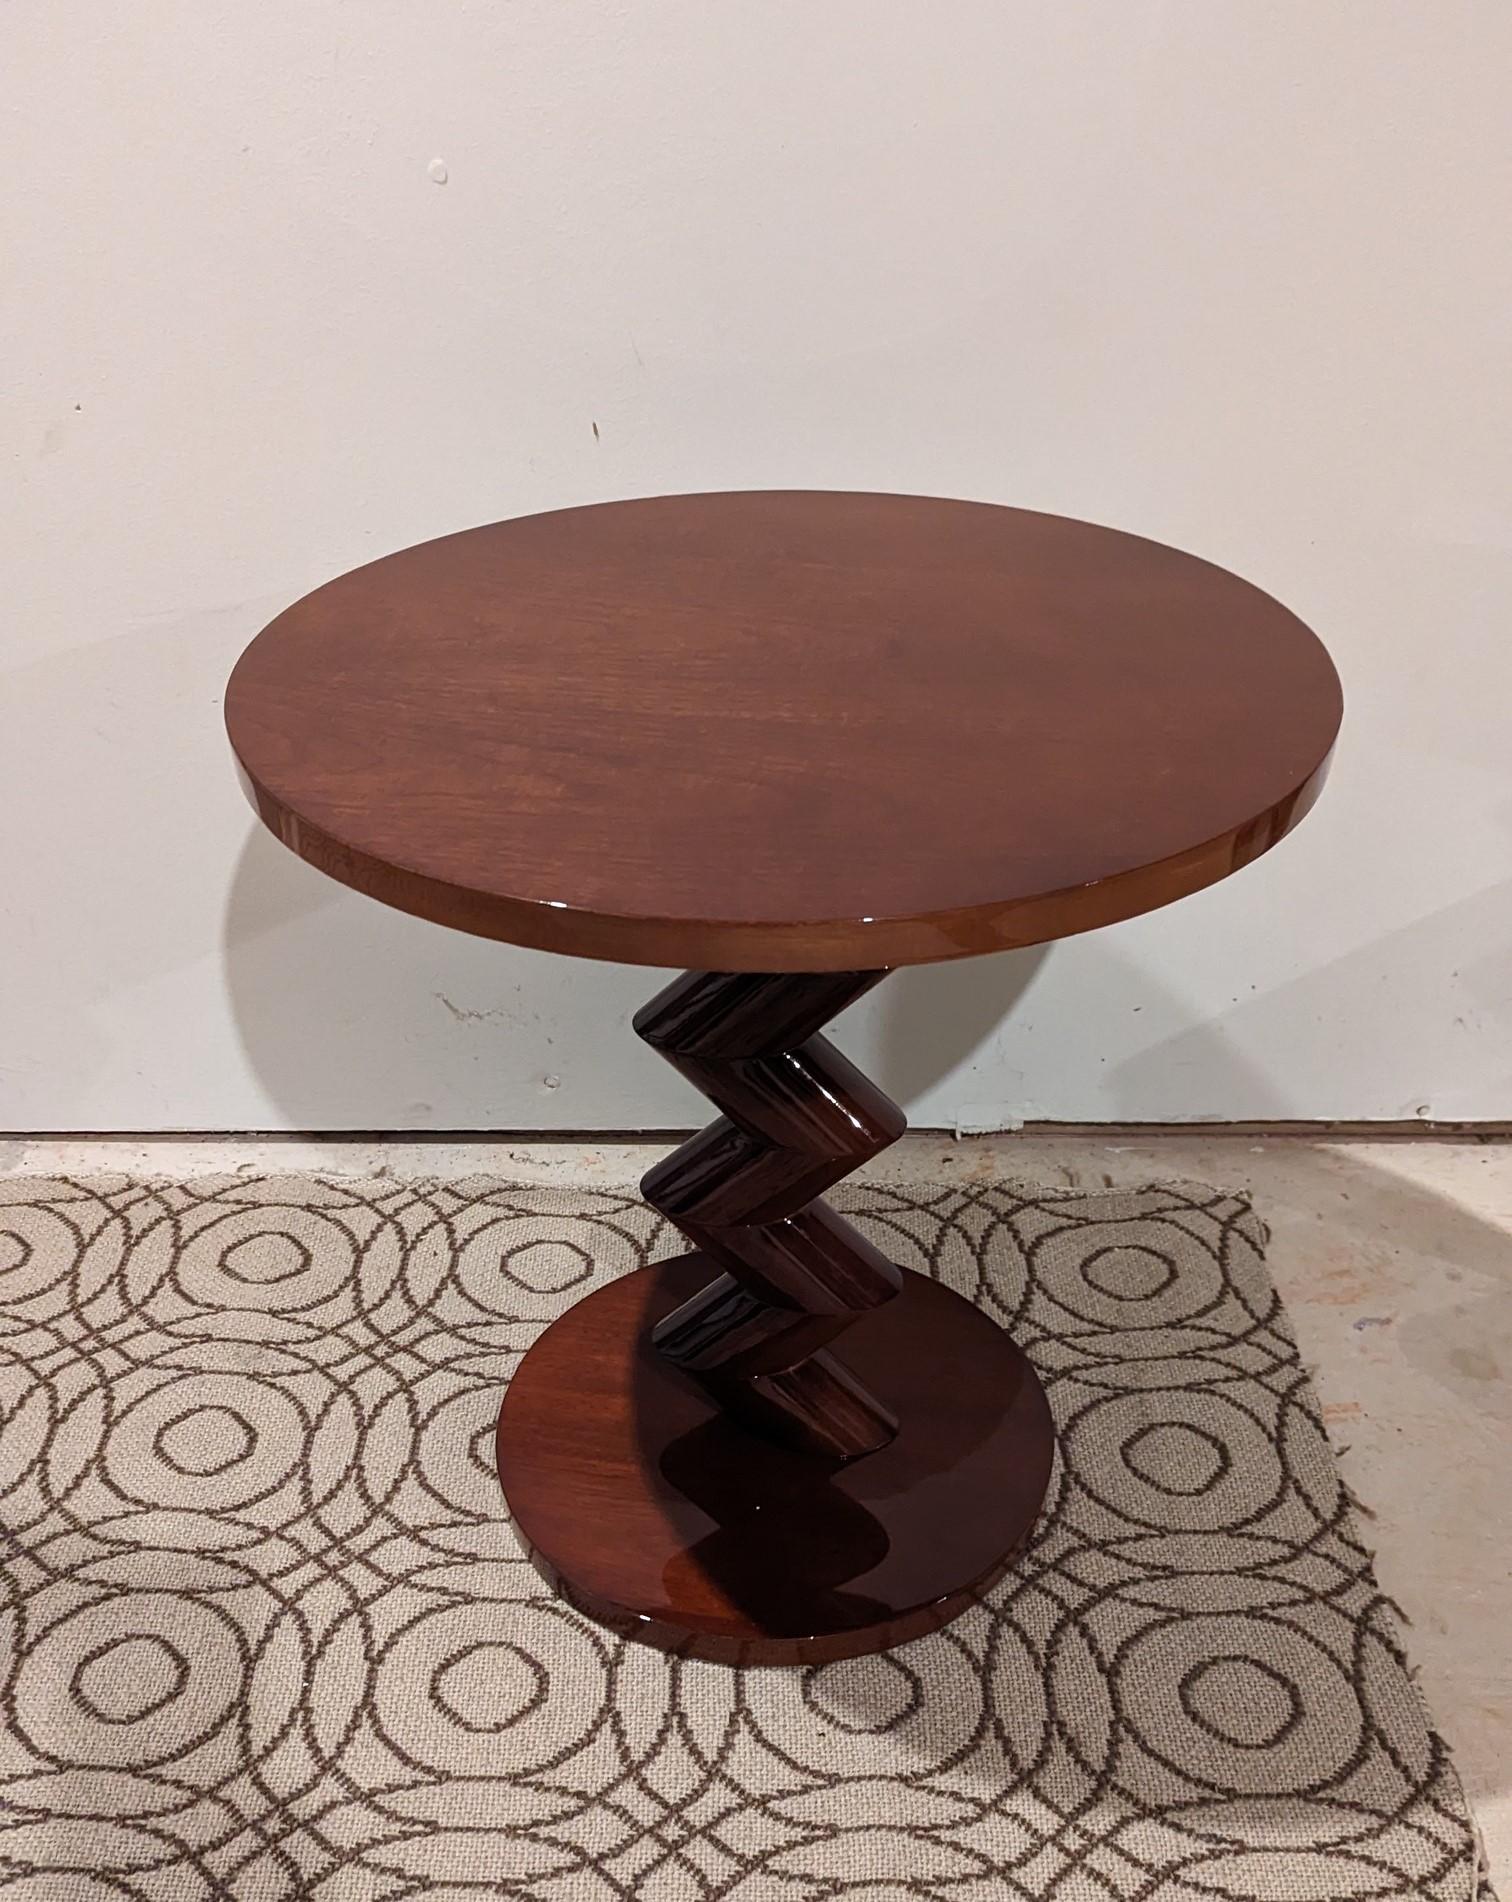 Vintage Zig-zag Pedestal Side - End Table Studio Craft In Good Condition For Sale In New York, NY